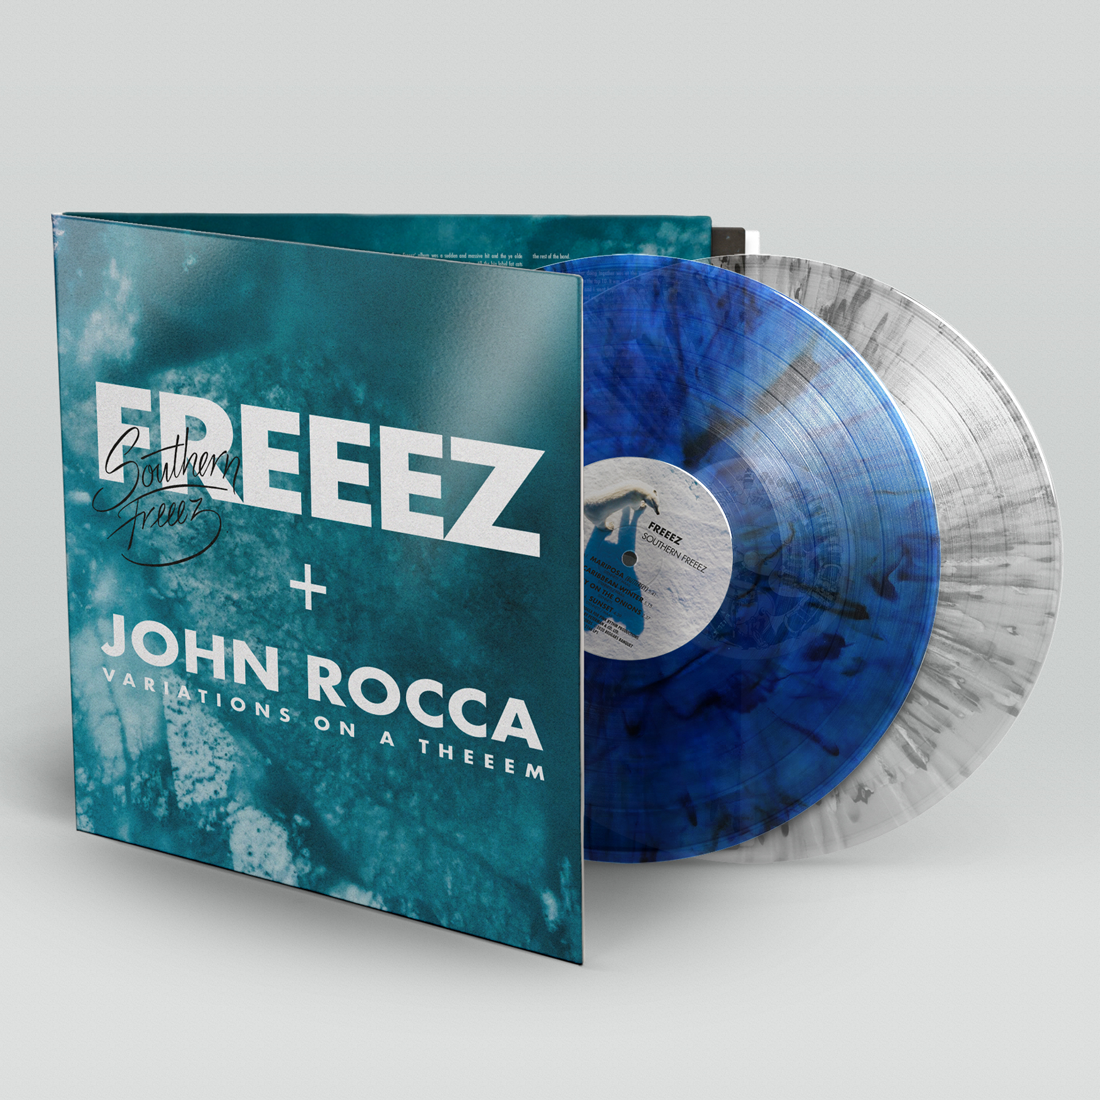 FREEZ & JOHN ROCCA - Southern Freeez / Variations on a Theeem - 2LP - Limited Blue Marbled / Transparent